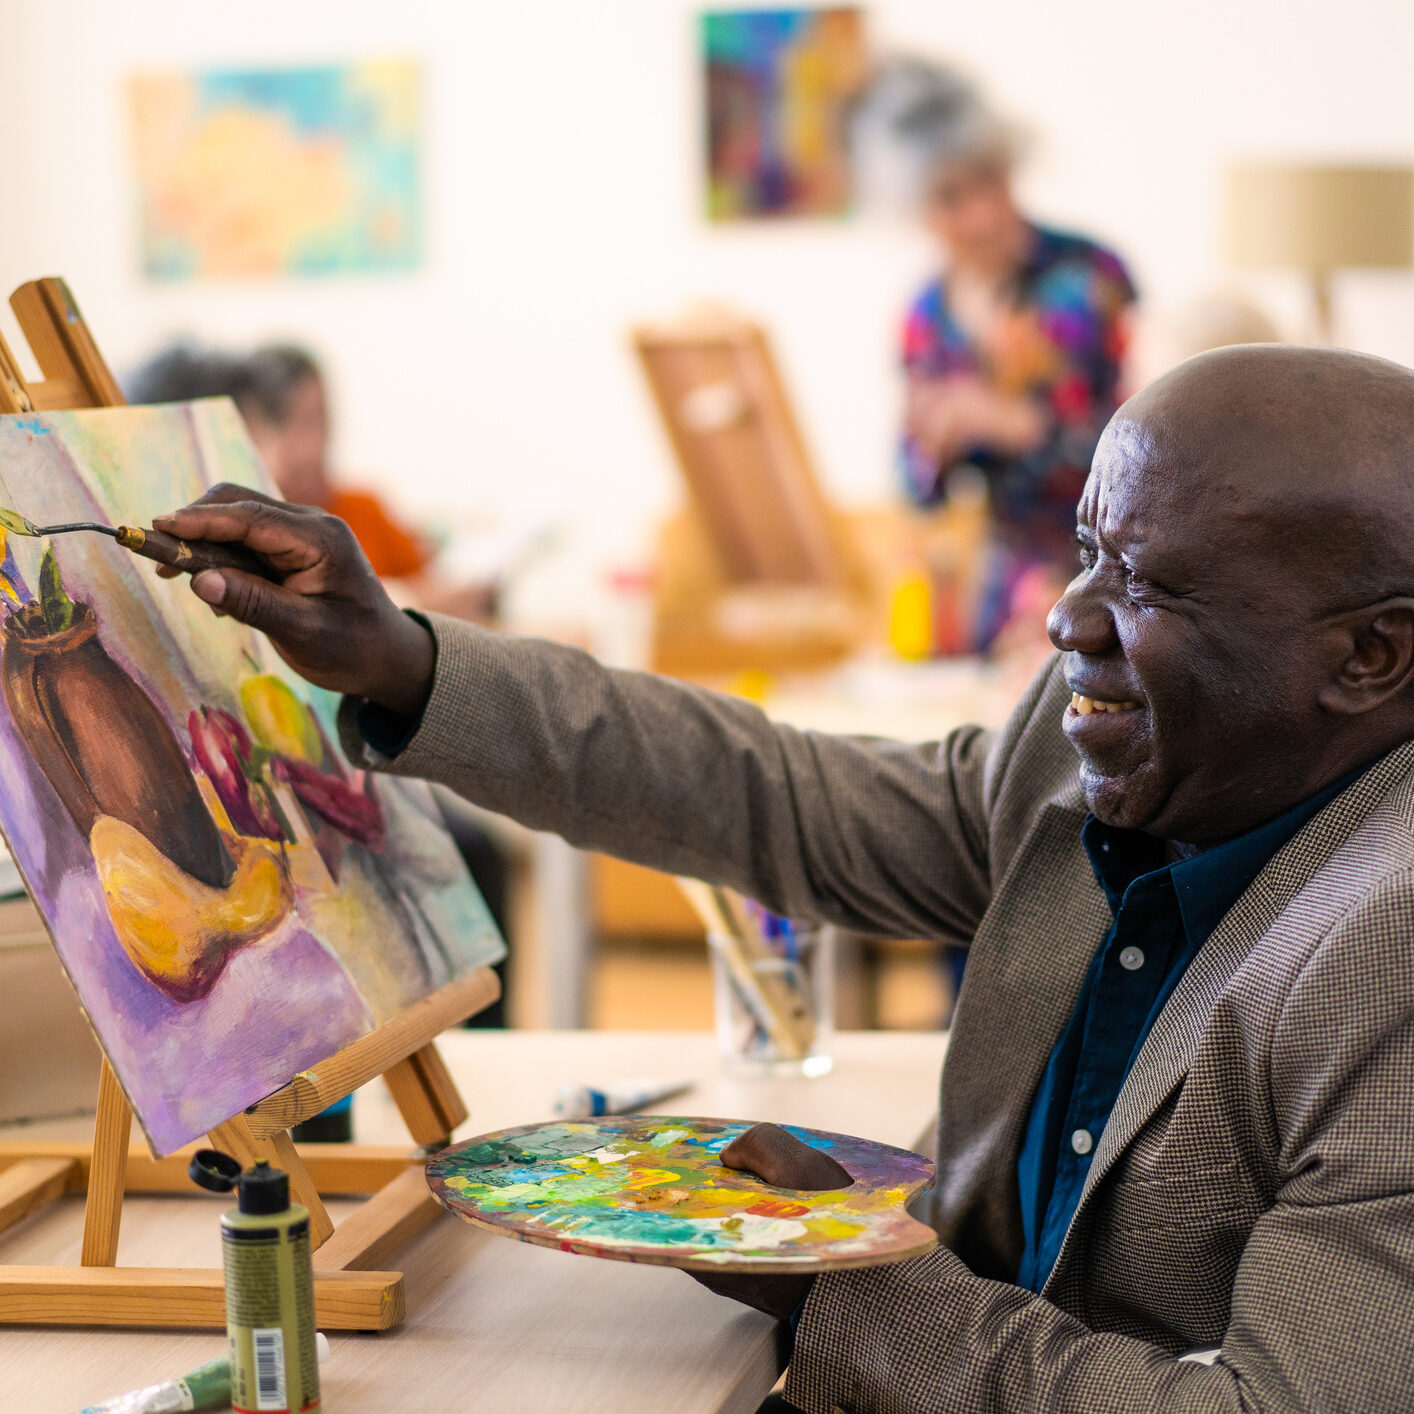 A senior African-American man is painting a picture using a paintbrush and palette for his composition on the canvas, behind him other members of the community are also painting